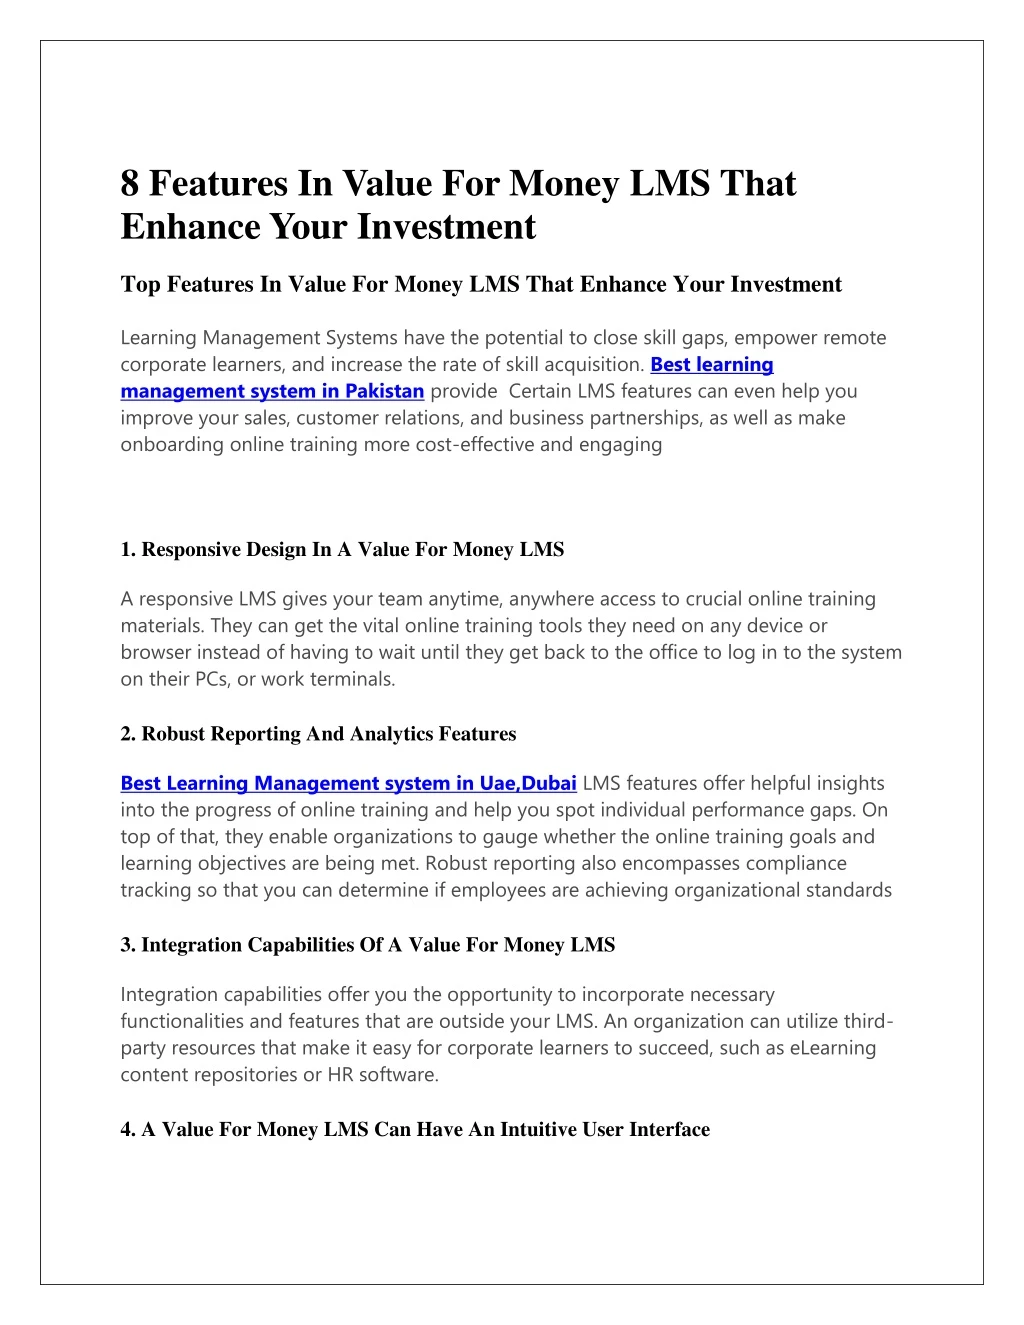 8 features in value for money lms that enhance